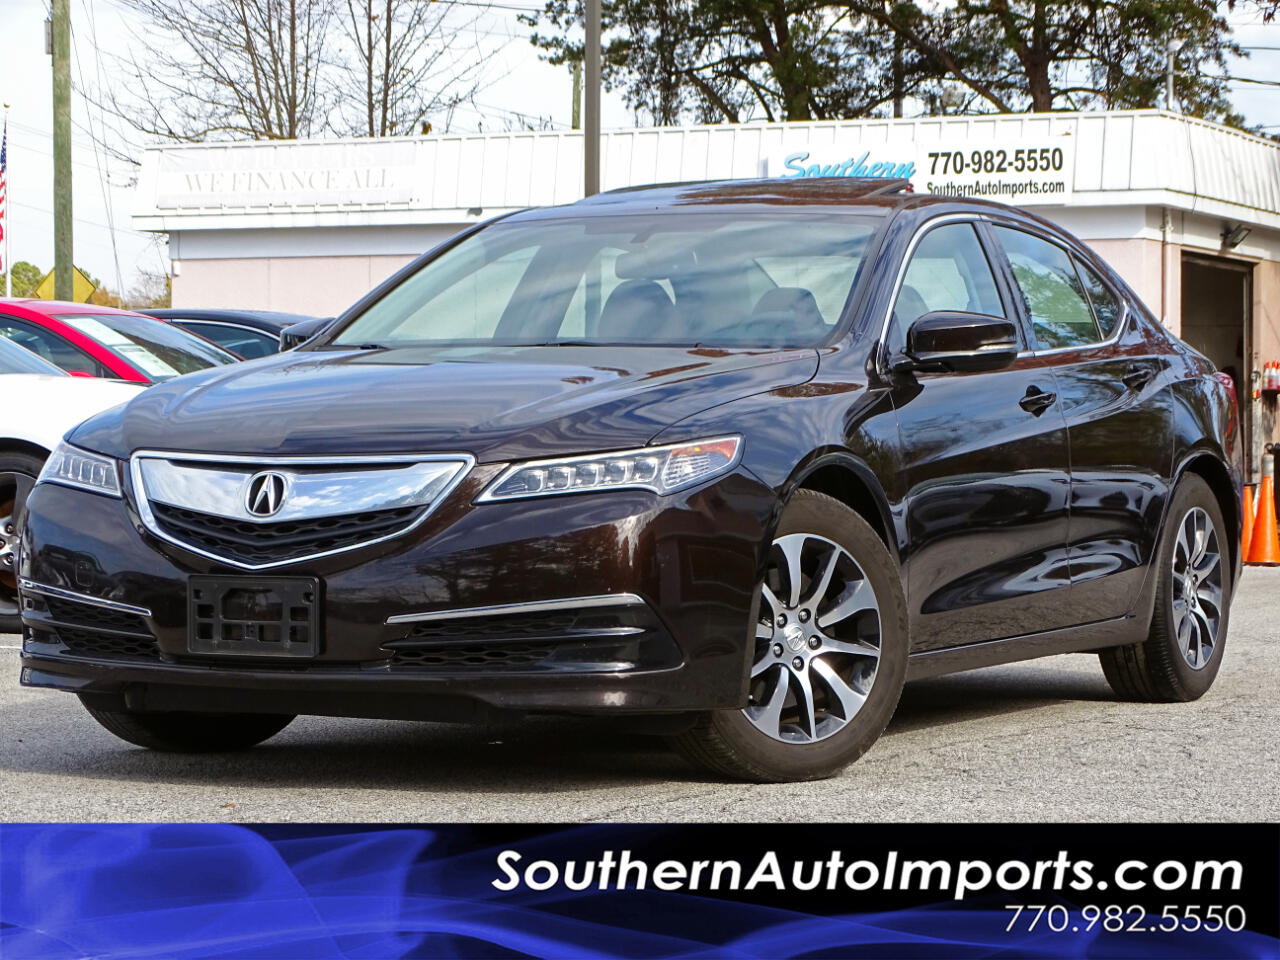 Used 2017 Acura Tlx Fwd For Sale In Stone Mountain Ga 30087